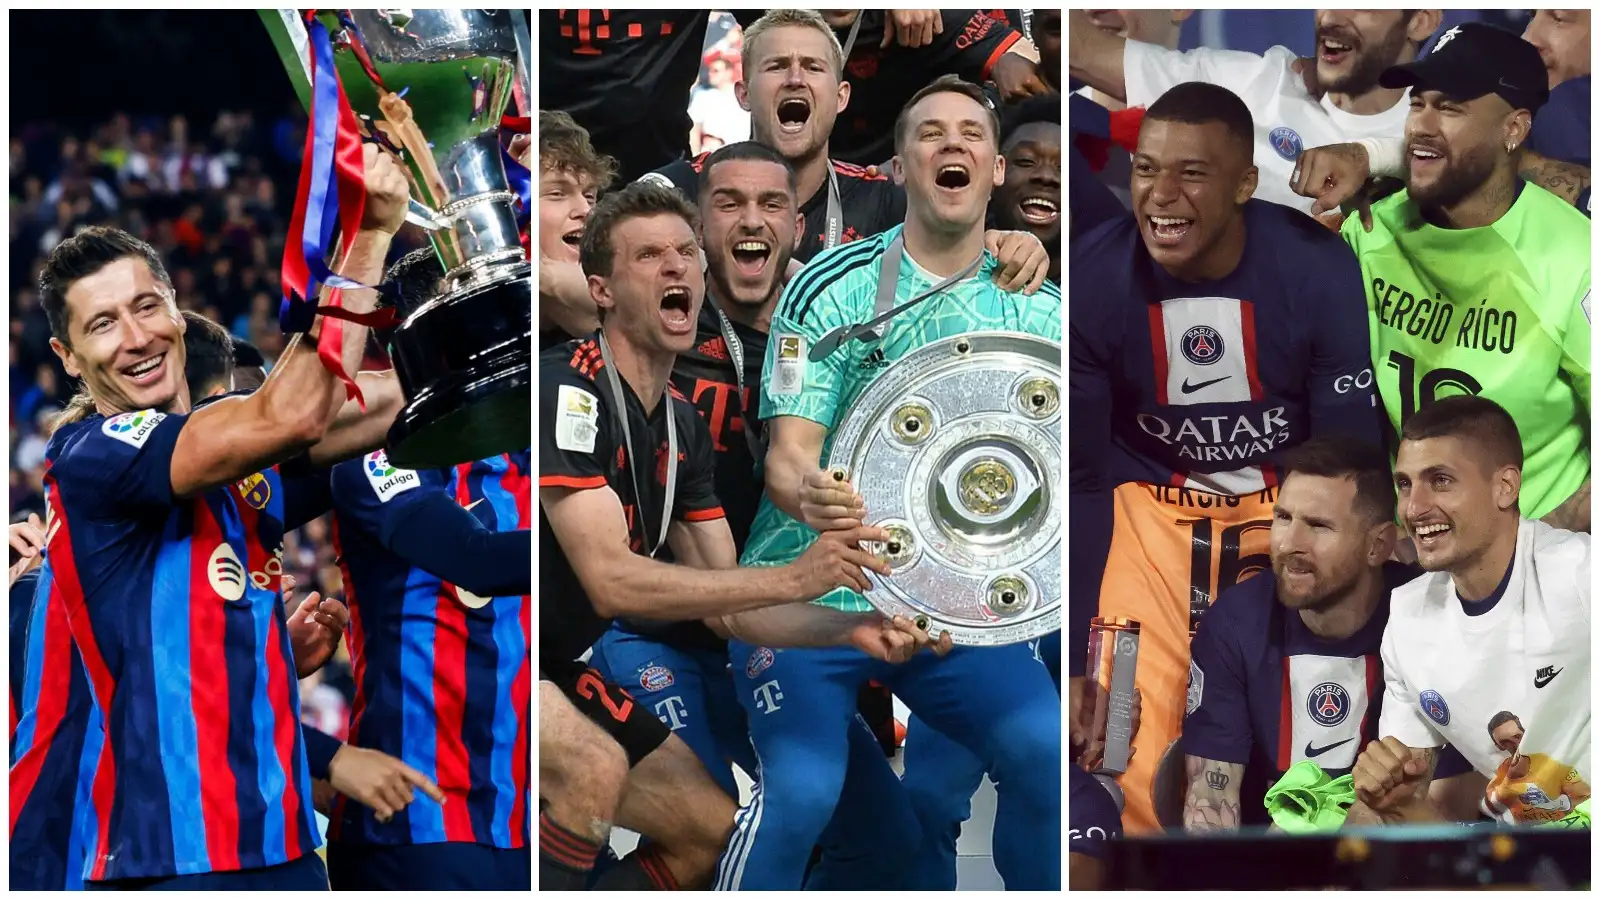 Barcelona, PSG and Bayern Munich all celebrate after being presented with their league title trophies.